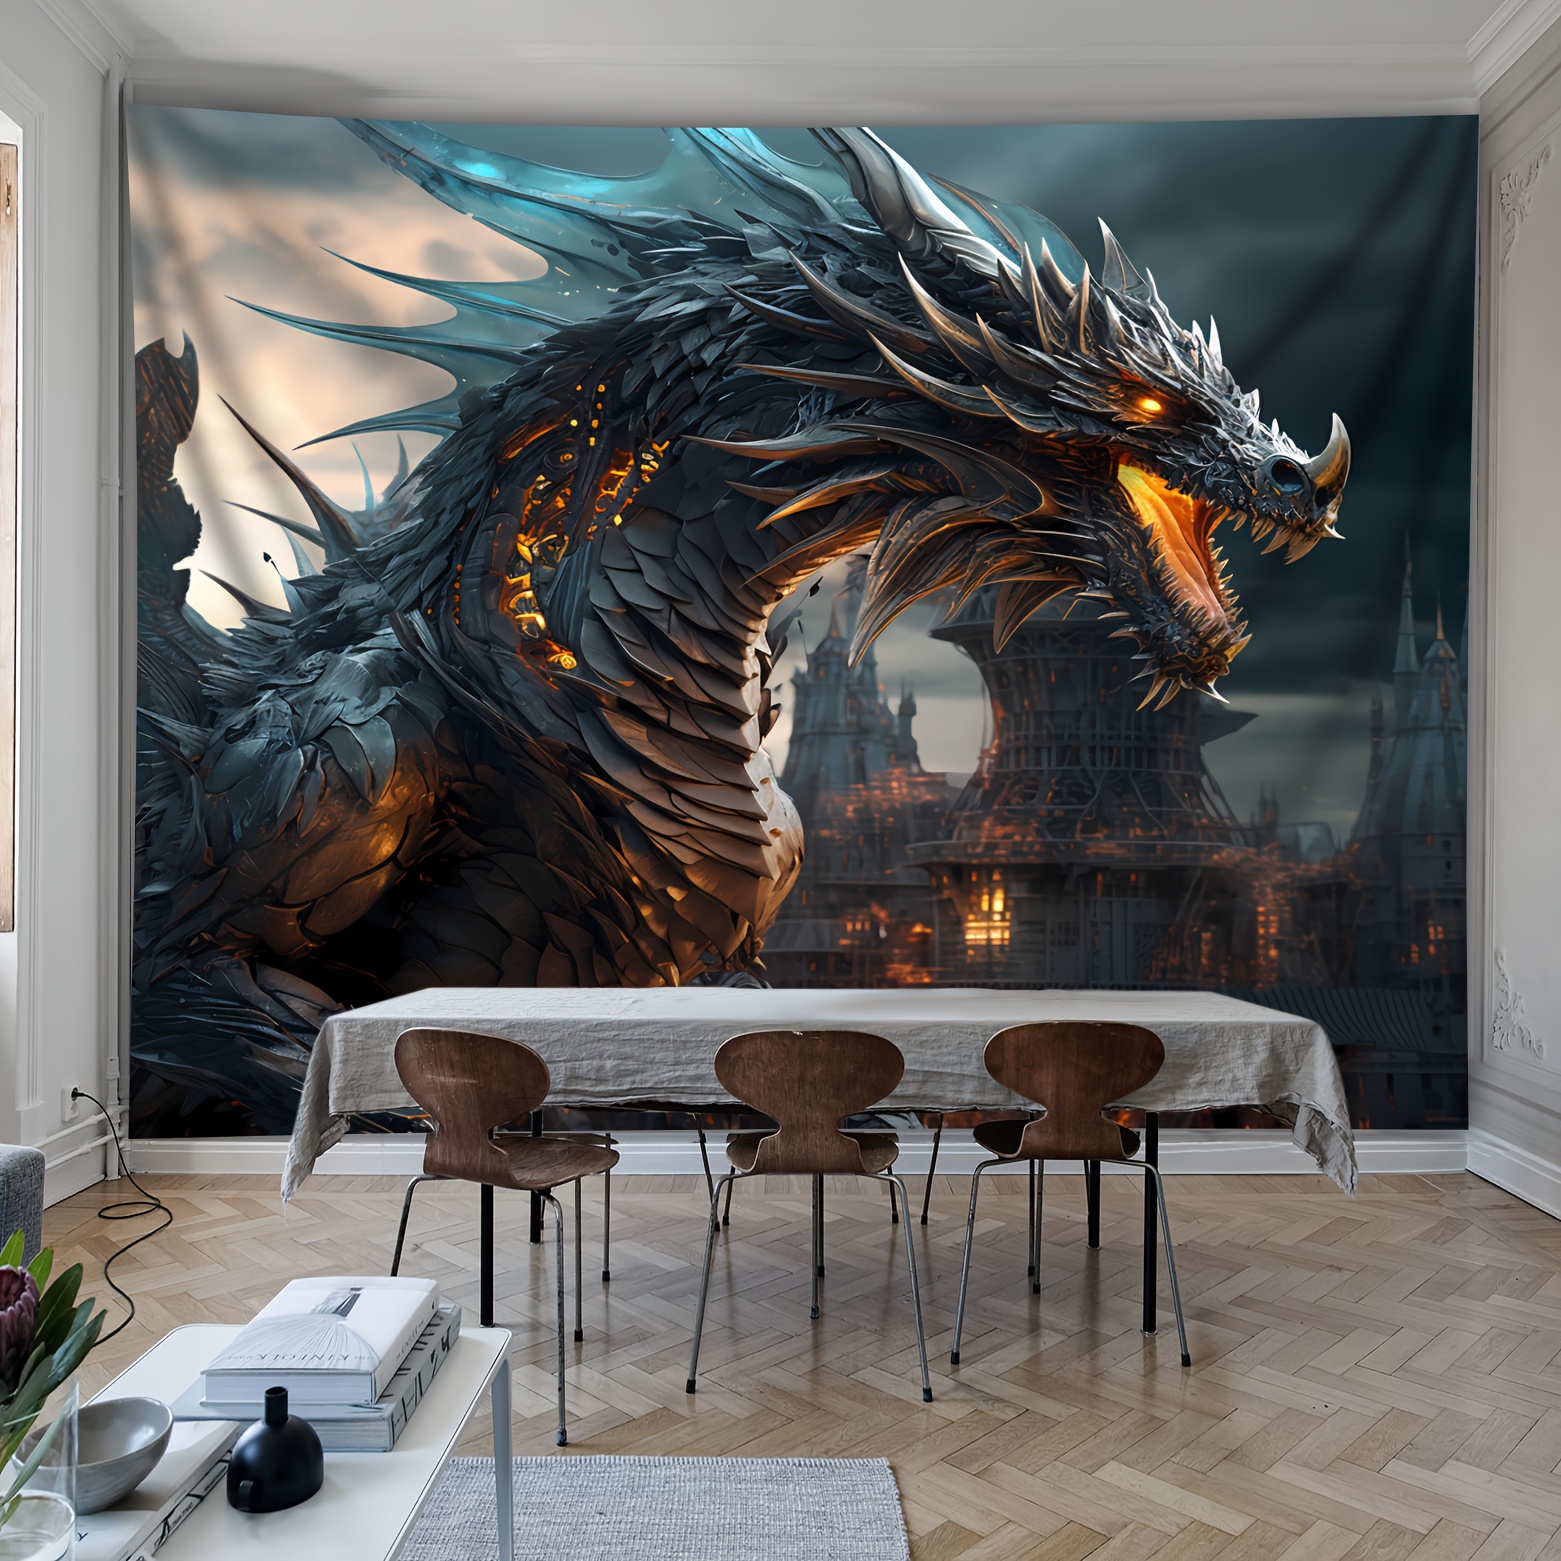 

Gothic Dark Fantasy Dragon Tapestry, Large Wall Hanging Decor For Living Room Dorm, Animal Print With Fire Dragon Theme, Indoor Woven Polyester Fabric, Easy Hang No-power-needed Home Accent